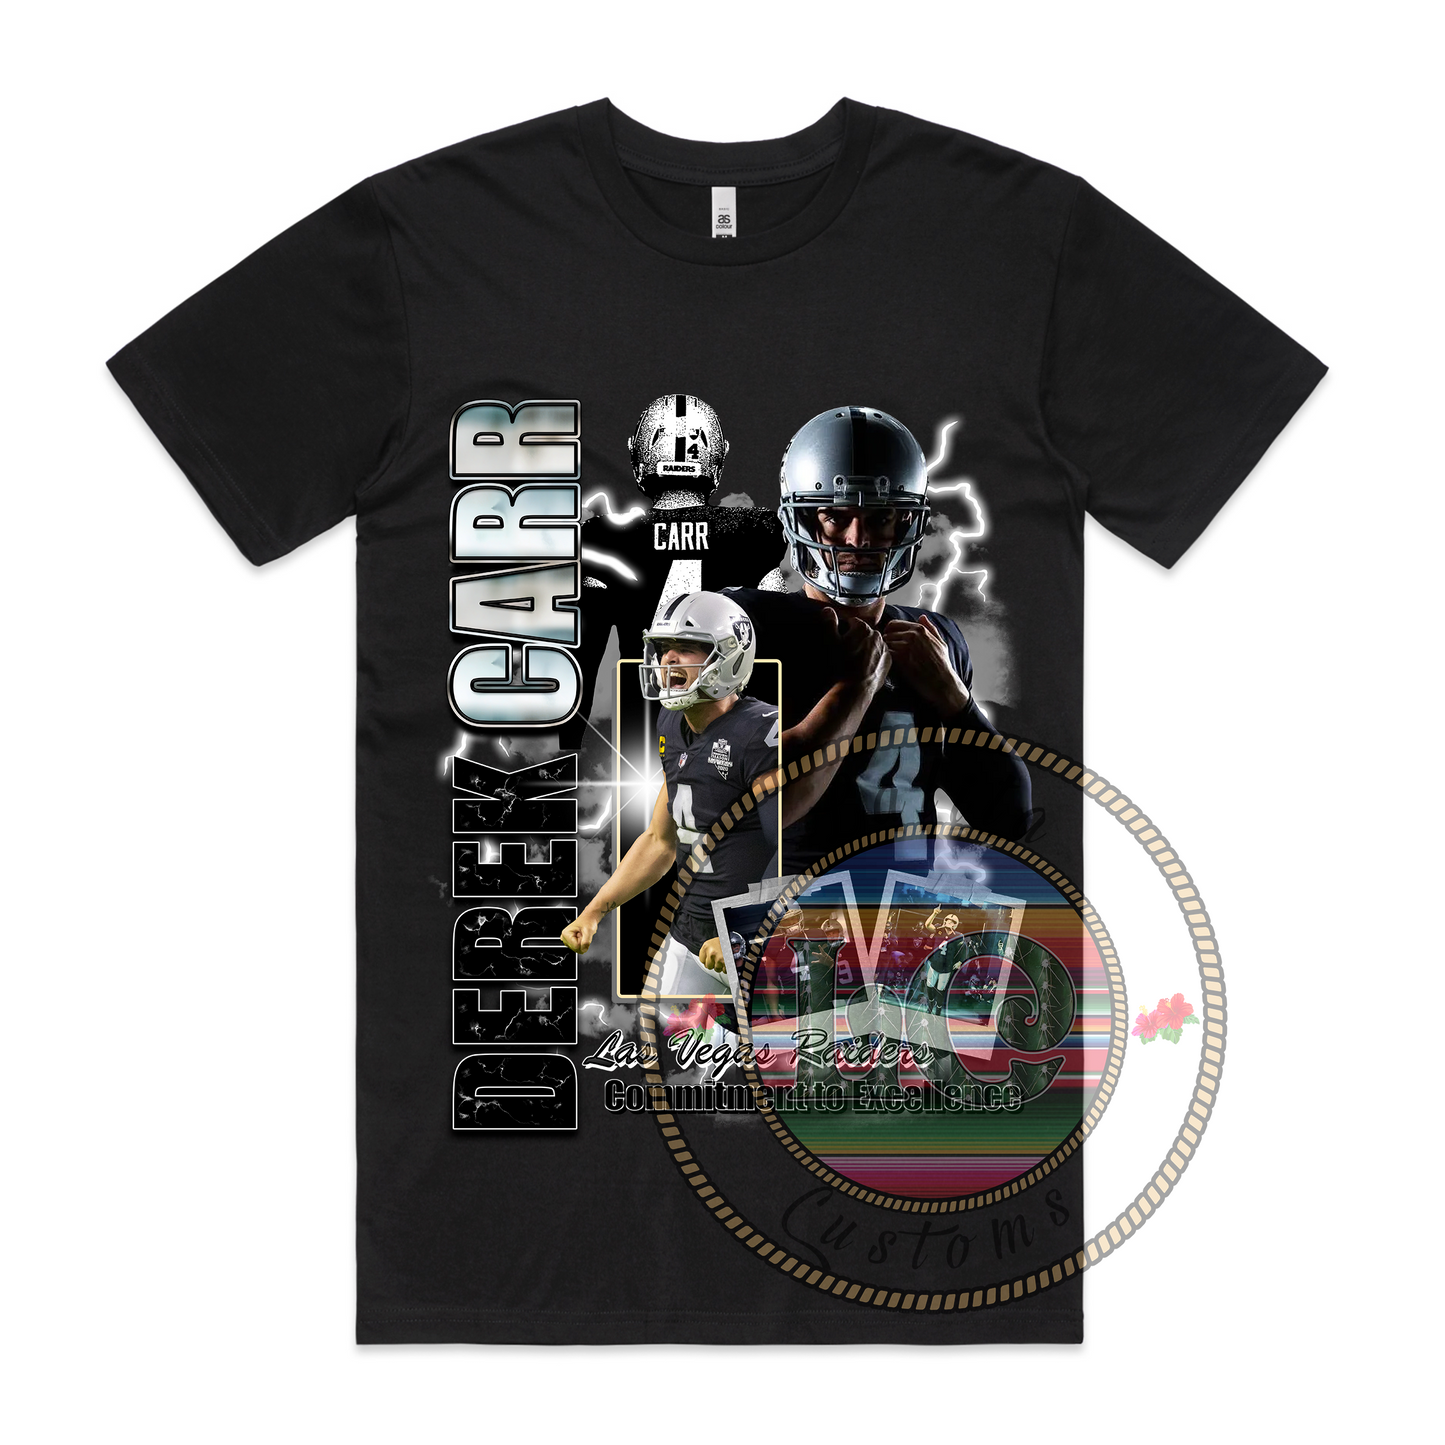 Derek Carr Commitment to Excellence Tee